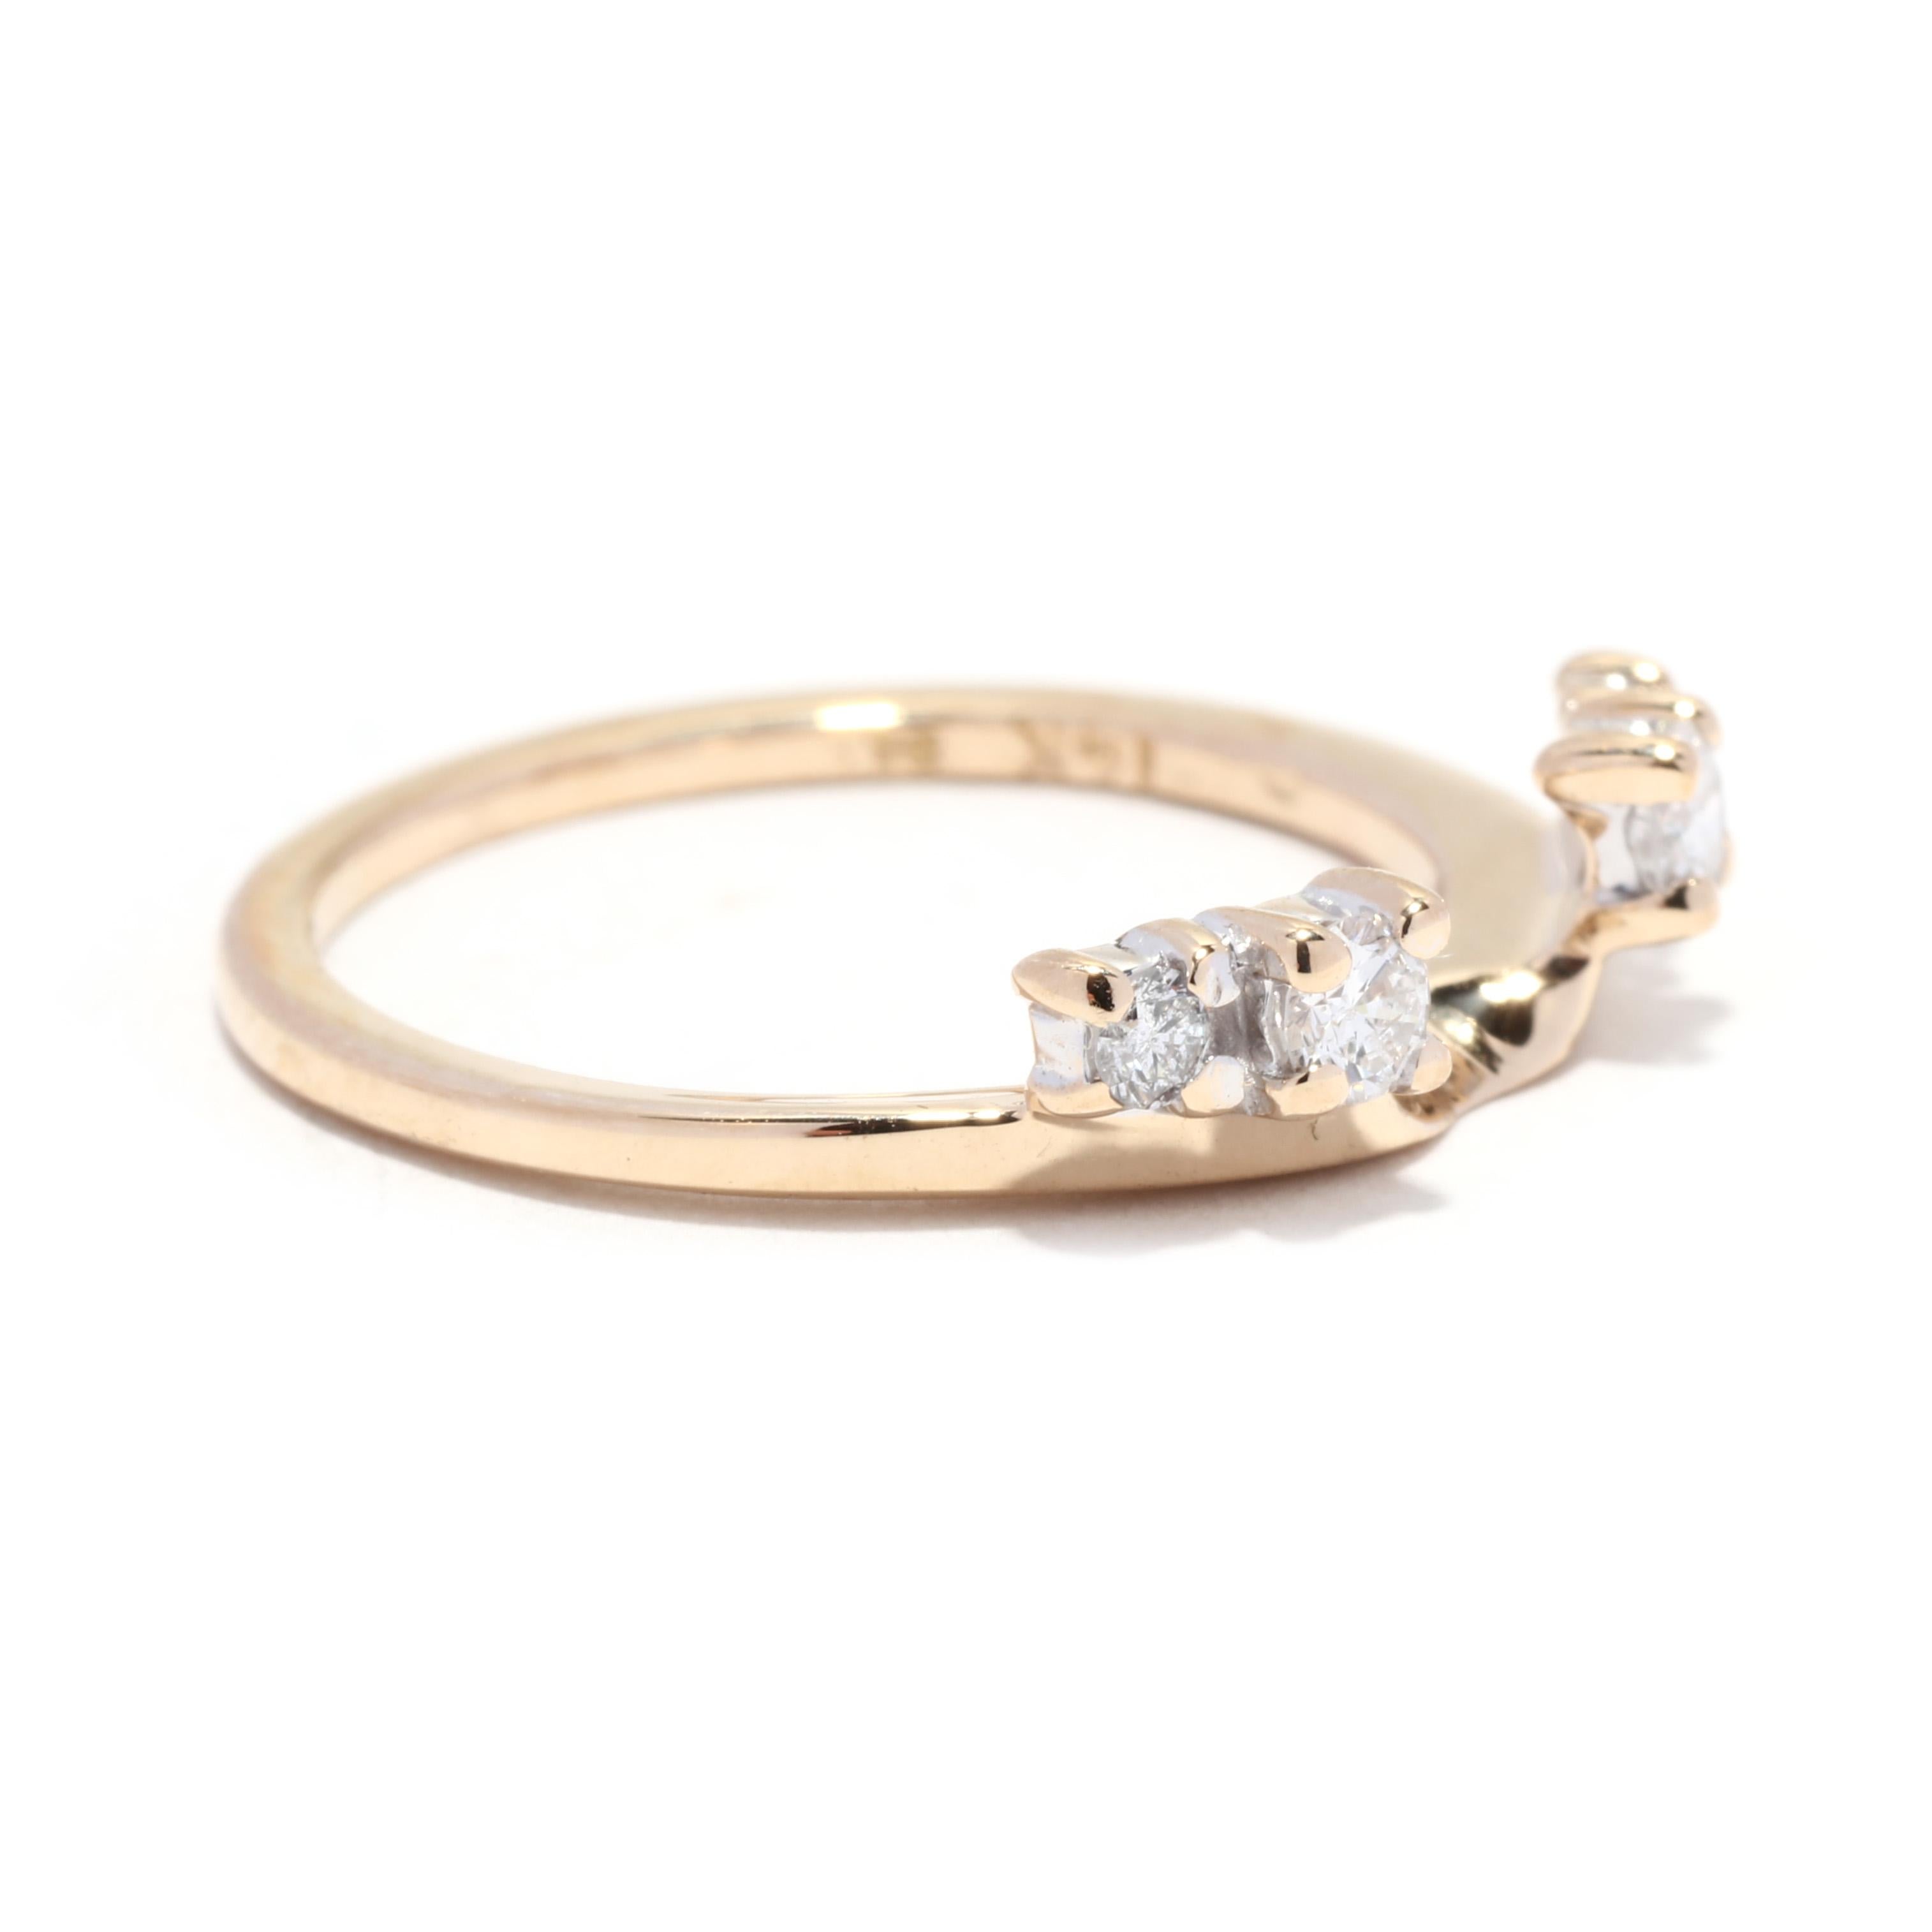 A 14 karat yellow gold diamond wrap ring guard. This stackable ring jacket features two round brilliant cut diamonds on either side weighing approximately .16 total carats with a center space to go around a solitaire ring.

Stones: 
- diamonds, 4